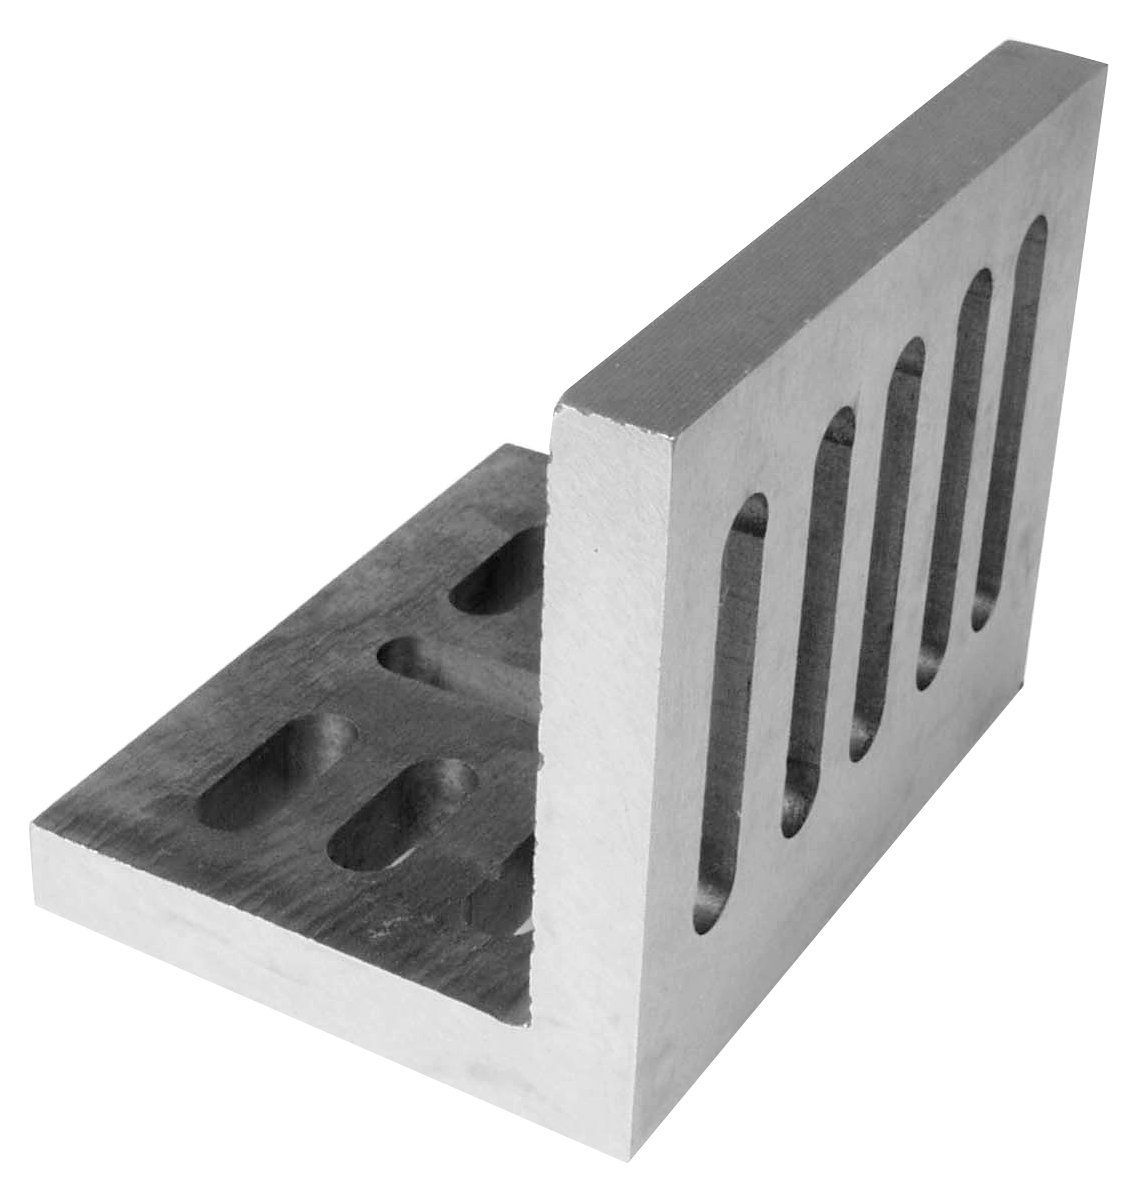 10 X 8 X 6 OPEN END SLOTTED ANGLE PLATE (3402-0210)